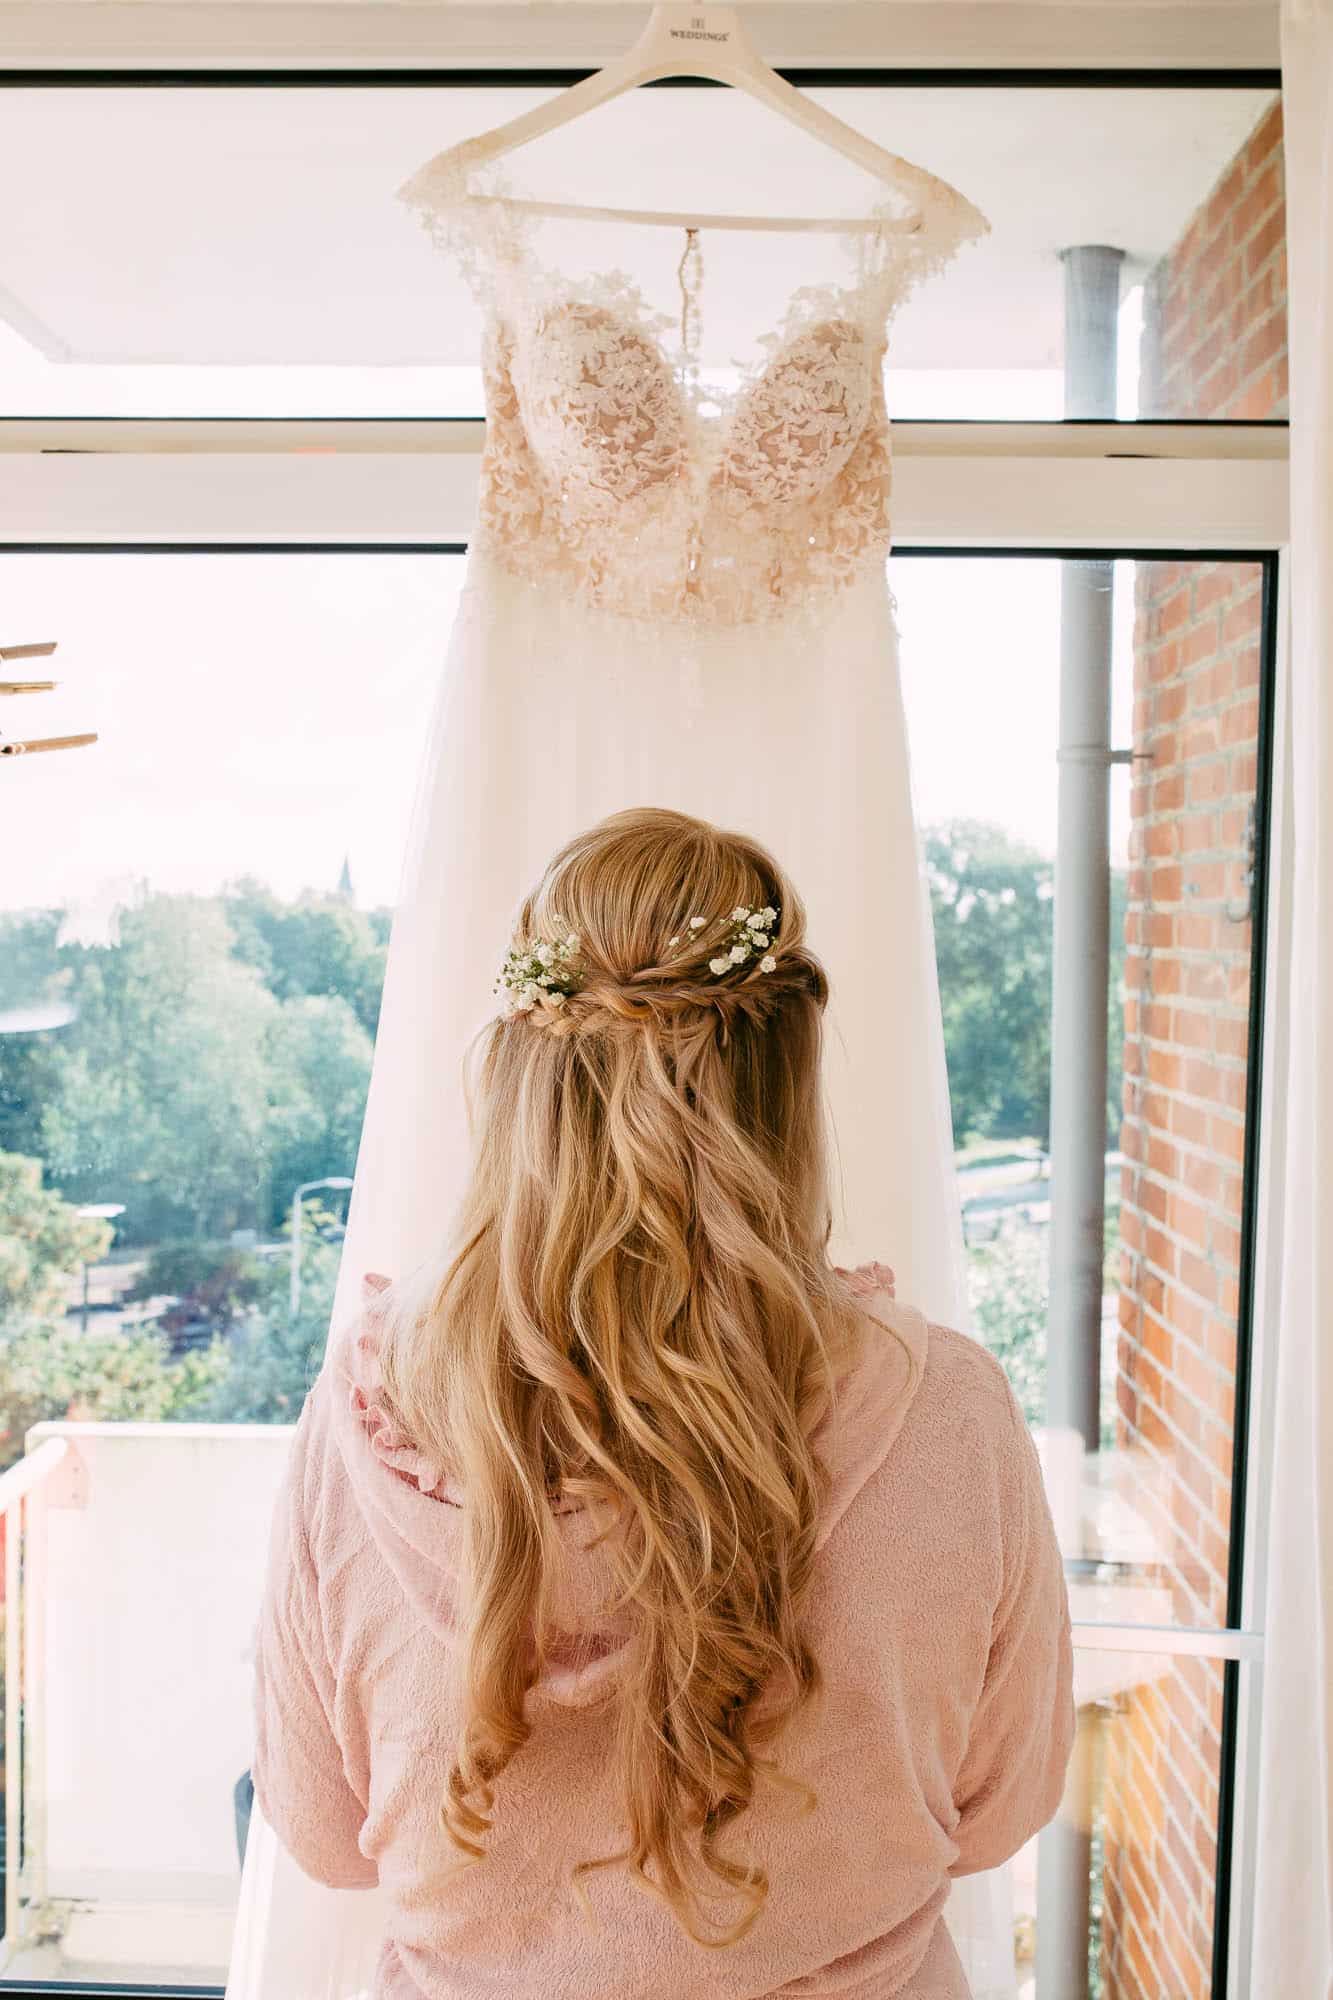 A bride looks at her wedding dress in front of a window.